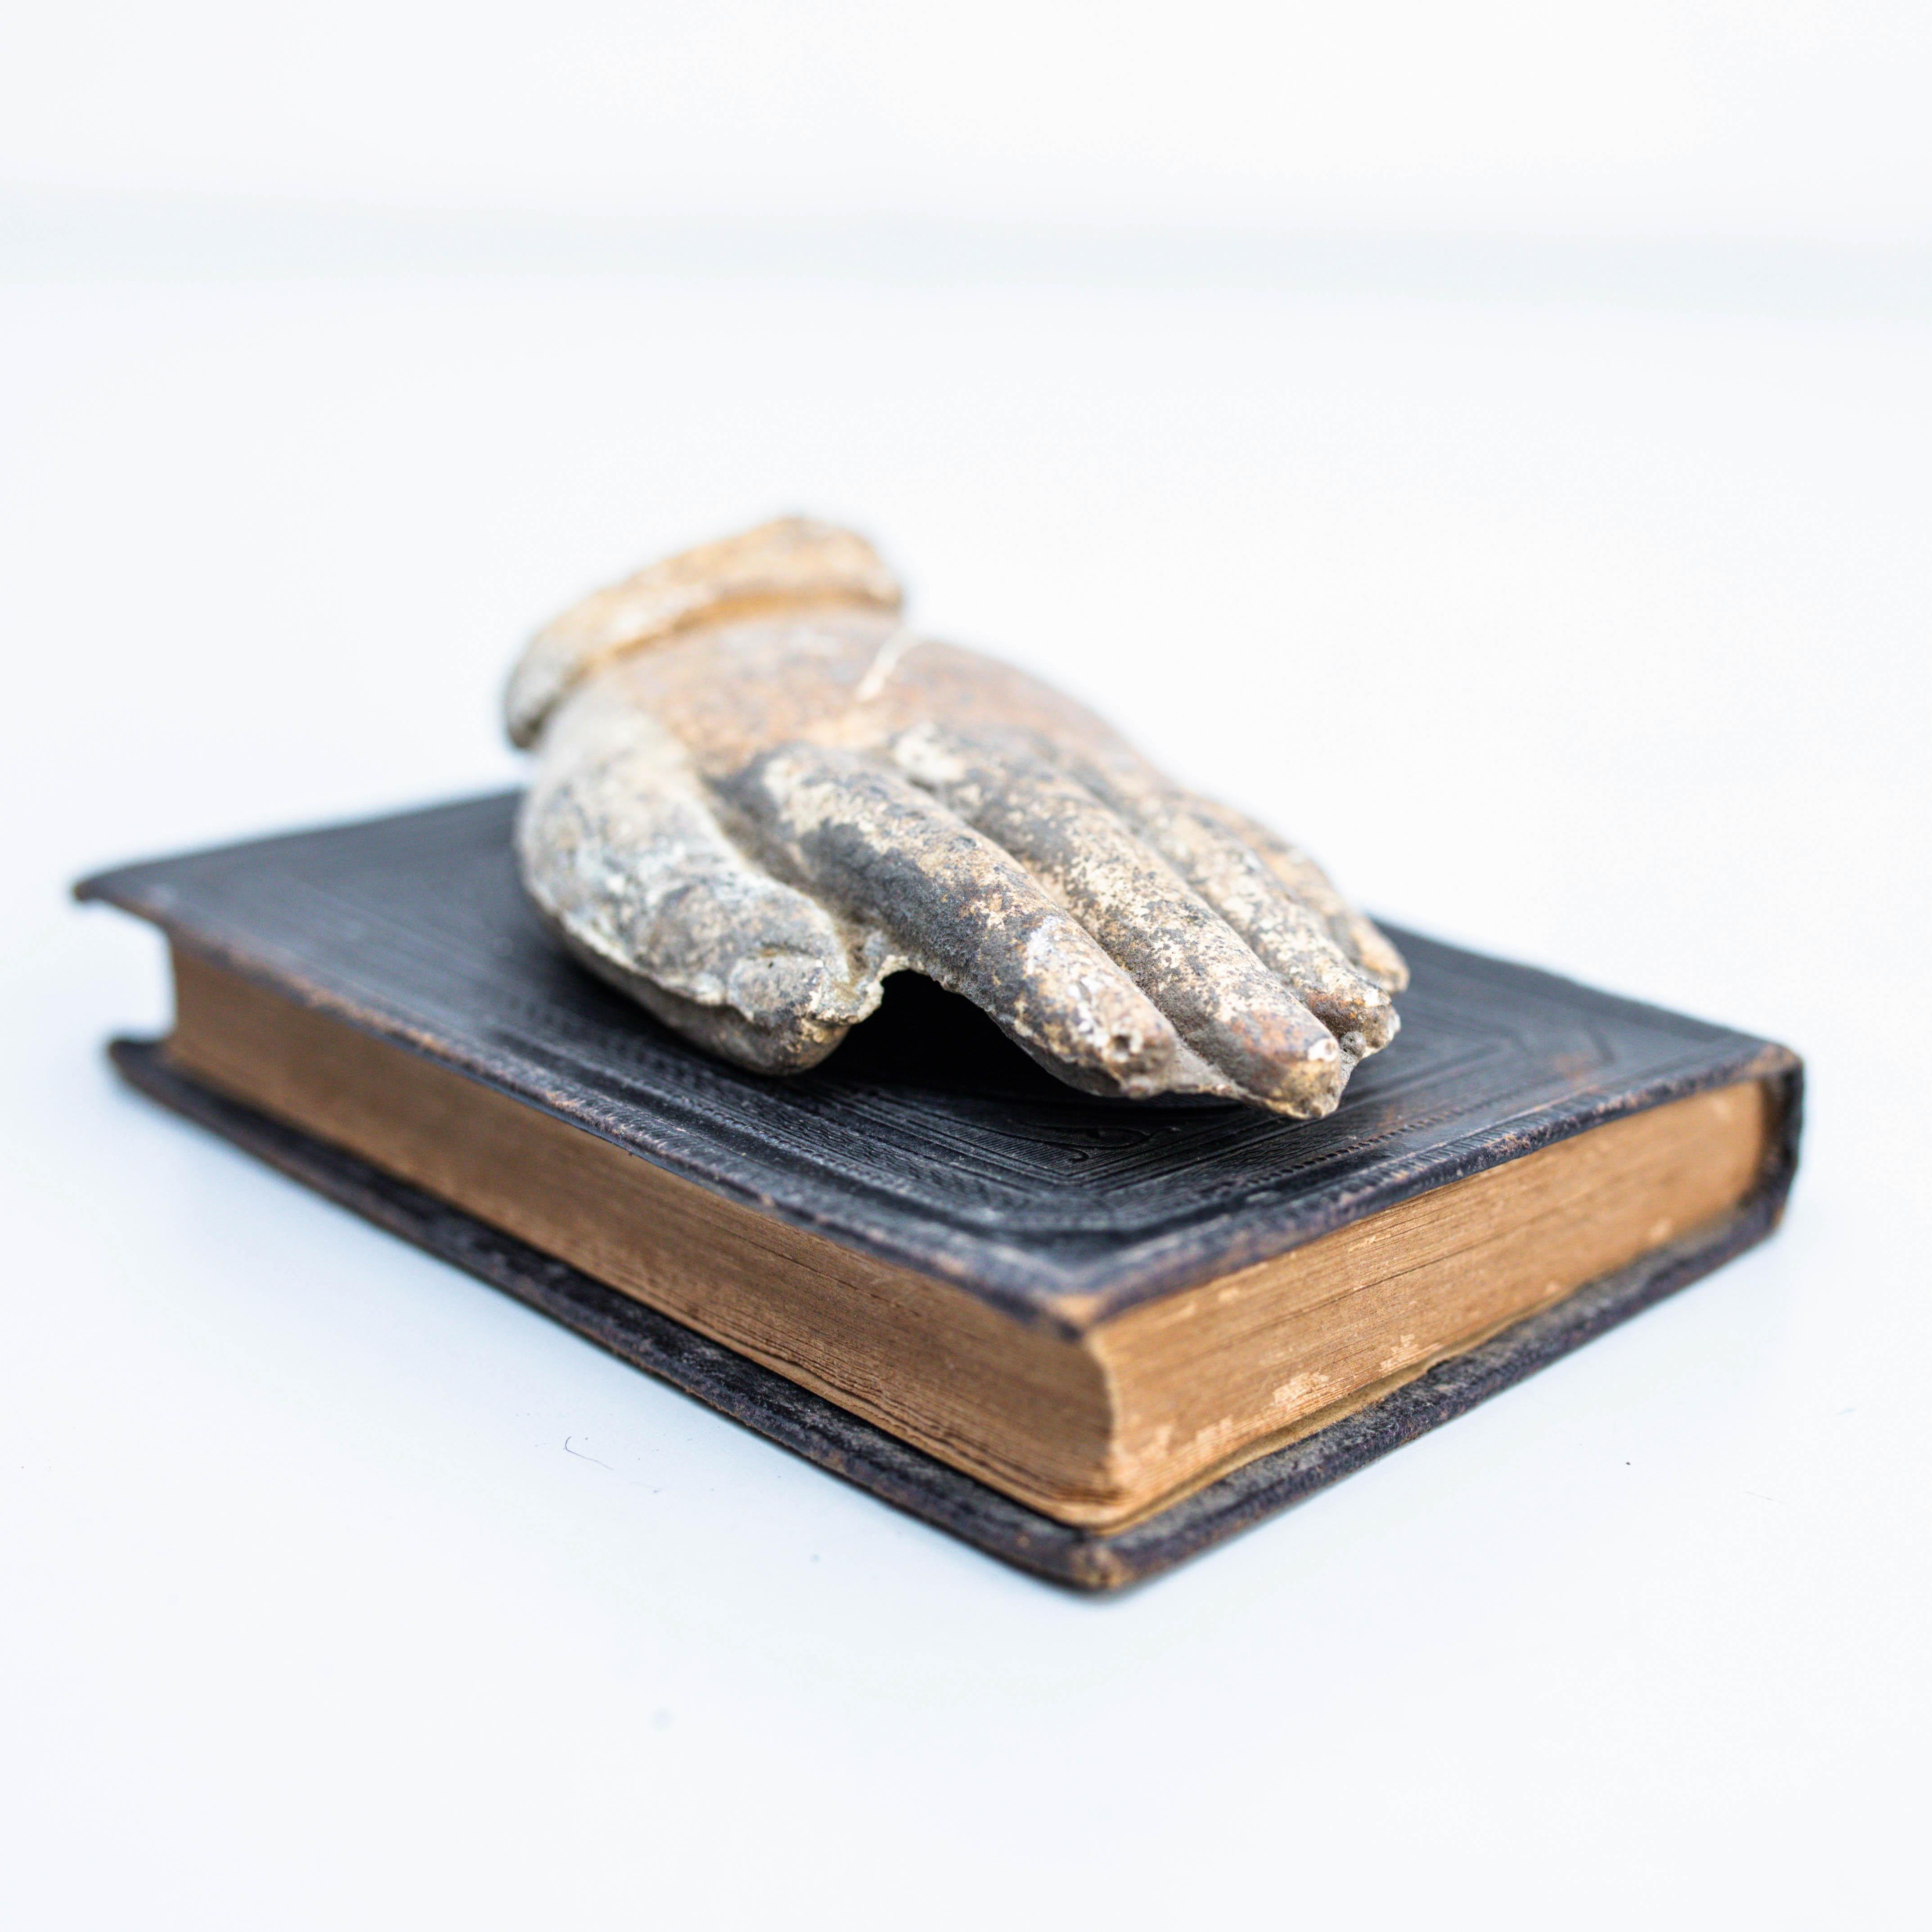 Artwork With Old Book and Mysterious Sculpture Hand.

Made by unknown manufacturer in Spain, circa 1990.

In original condition, with minor wear consistent with age and use, preserving a beautiful patina.